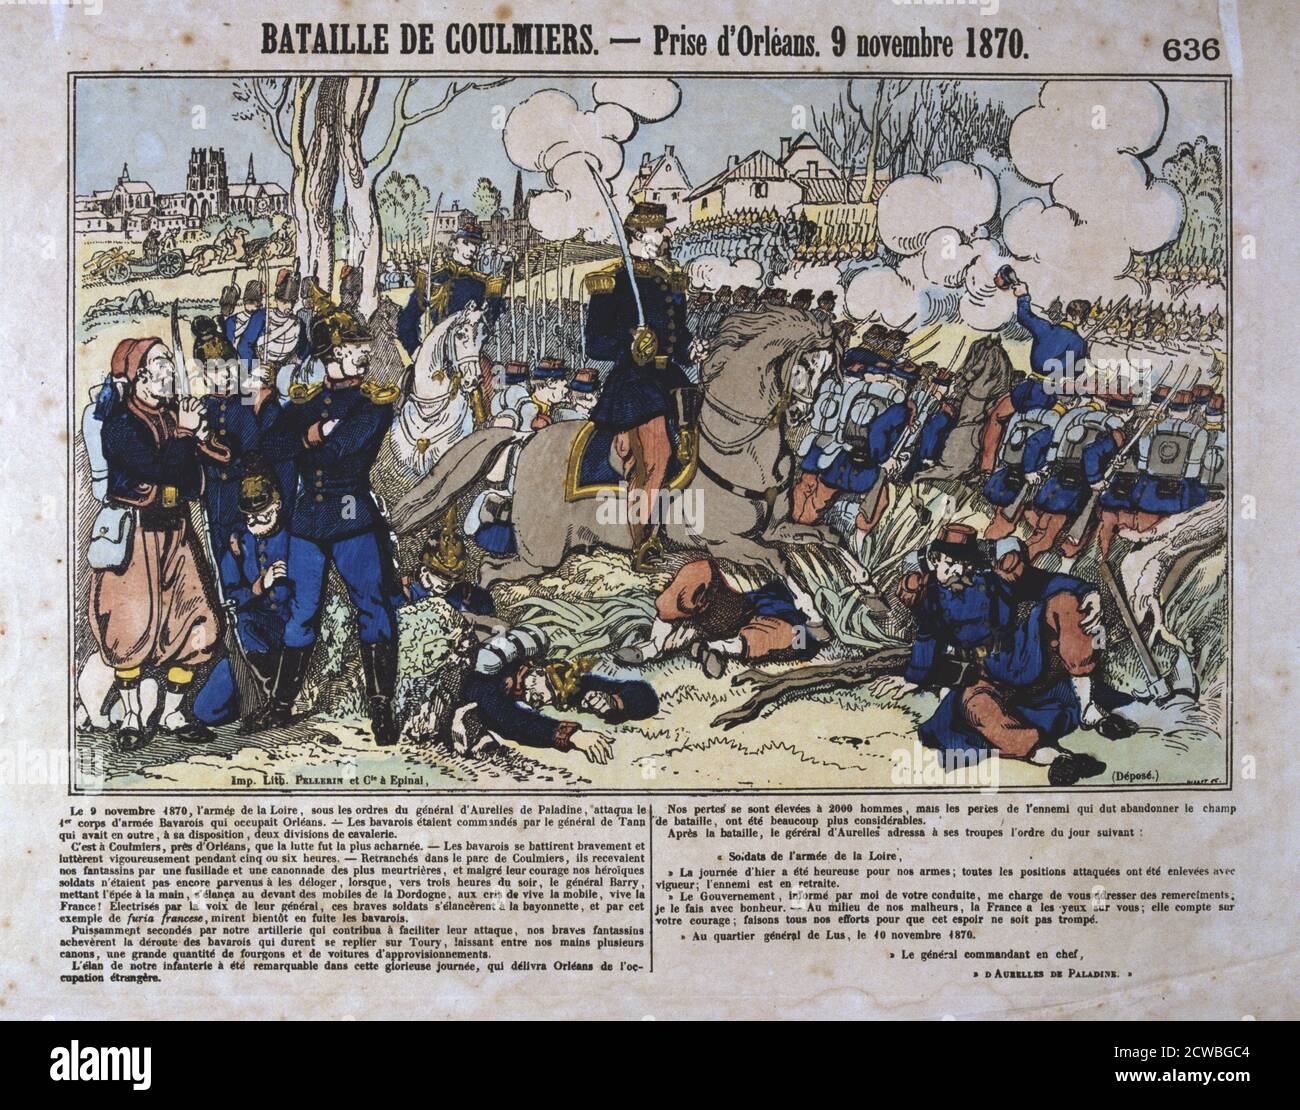 Battle of Coulmiers, Franco-Prussian War, 9th November 1870. The French defeated a Bavarian army at Coulmiers, enabling them to capture the nearby city of Orleans. Reinforced by fresh troops, the Germans recaptured the city on 4th December. From a private collection. Stock Photo